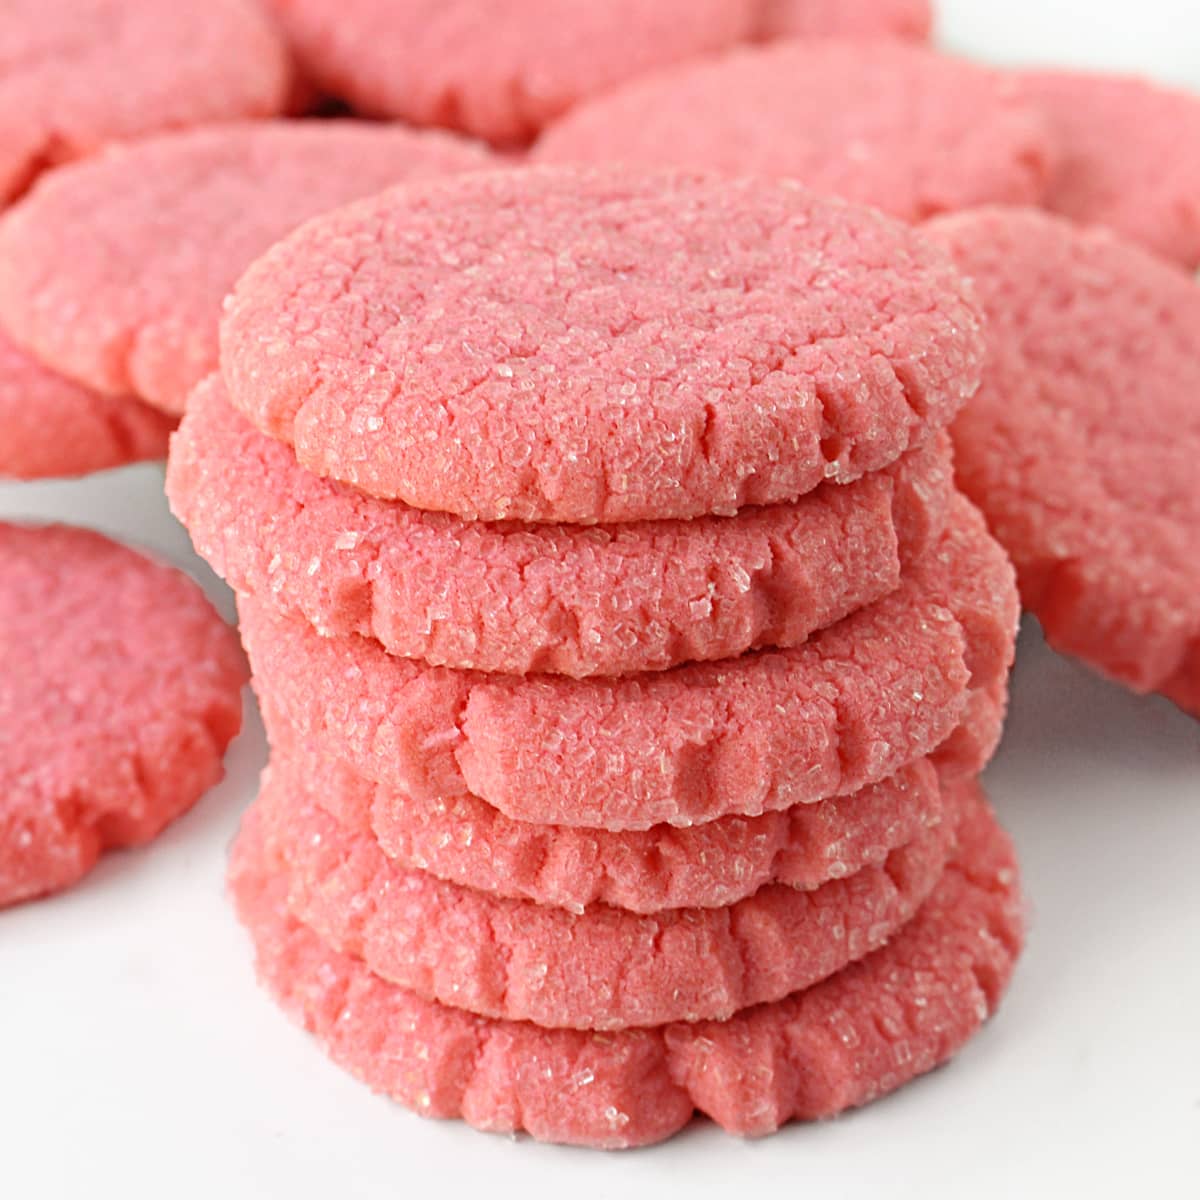 Closeup of a stack of pink sugar cookies  showing the sugar coating and thick edges.